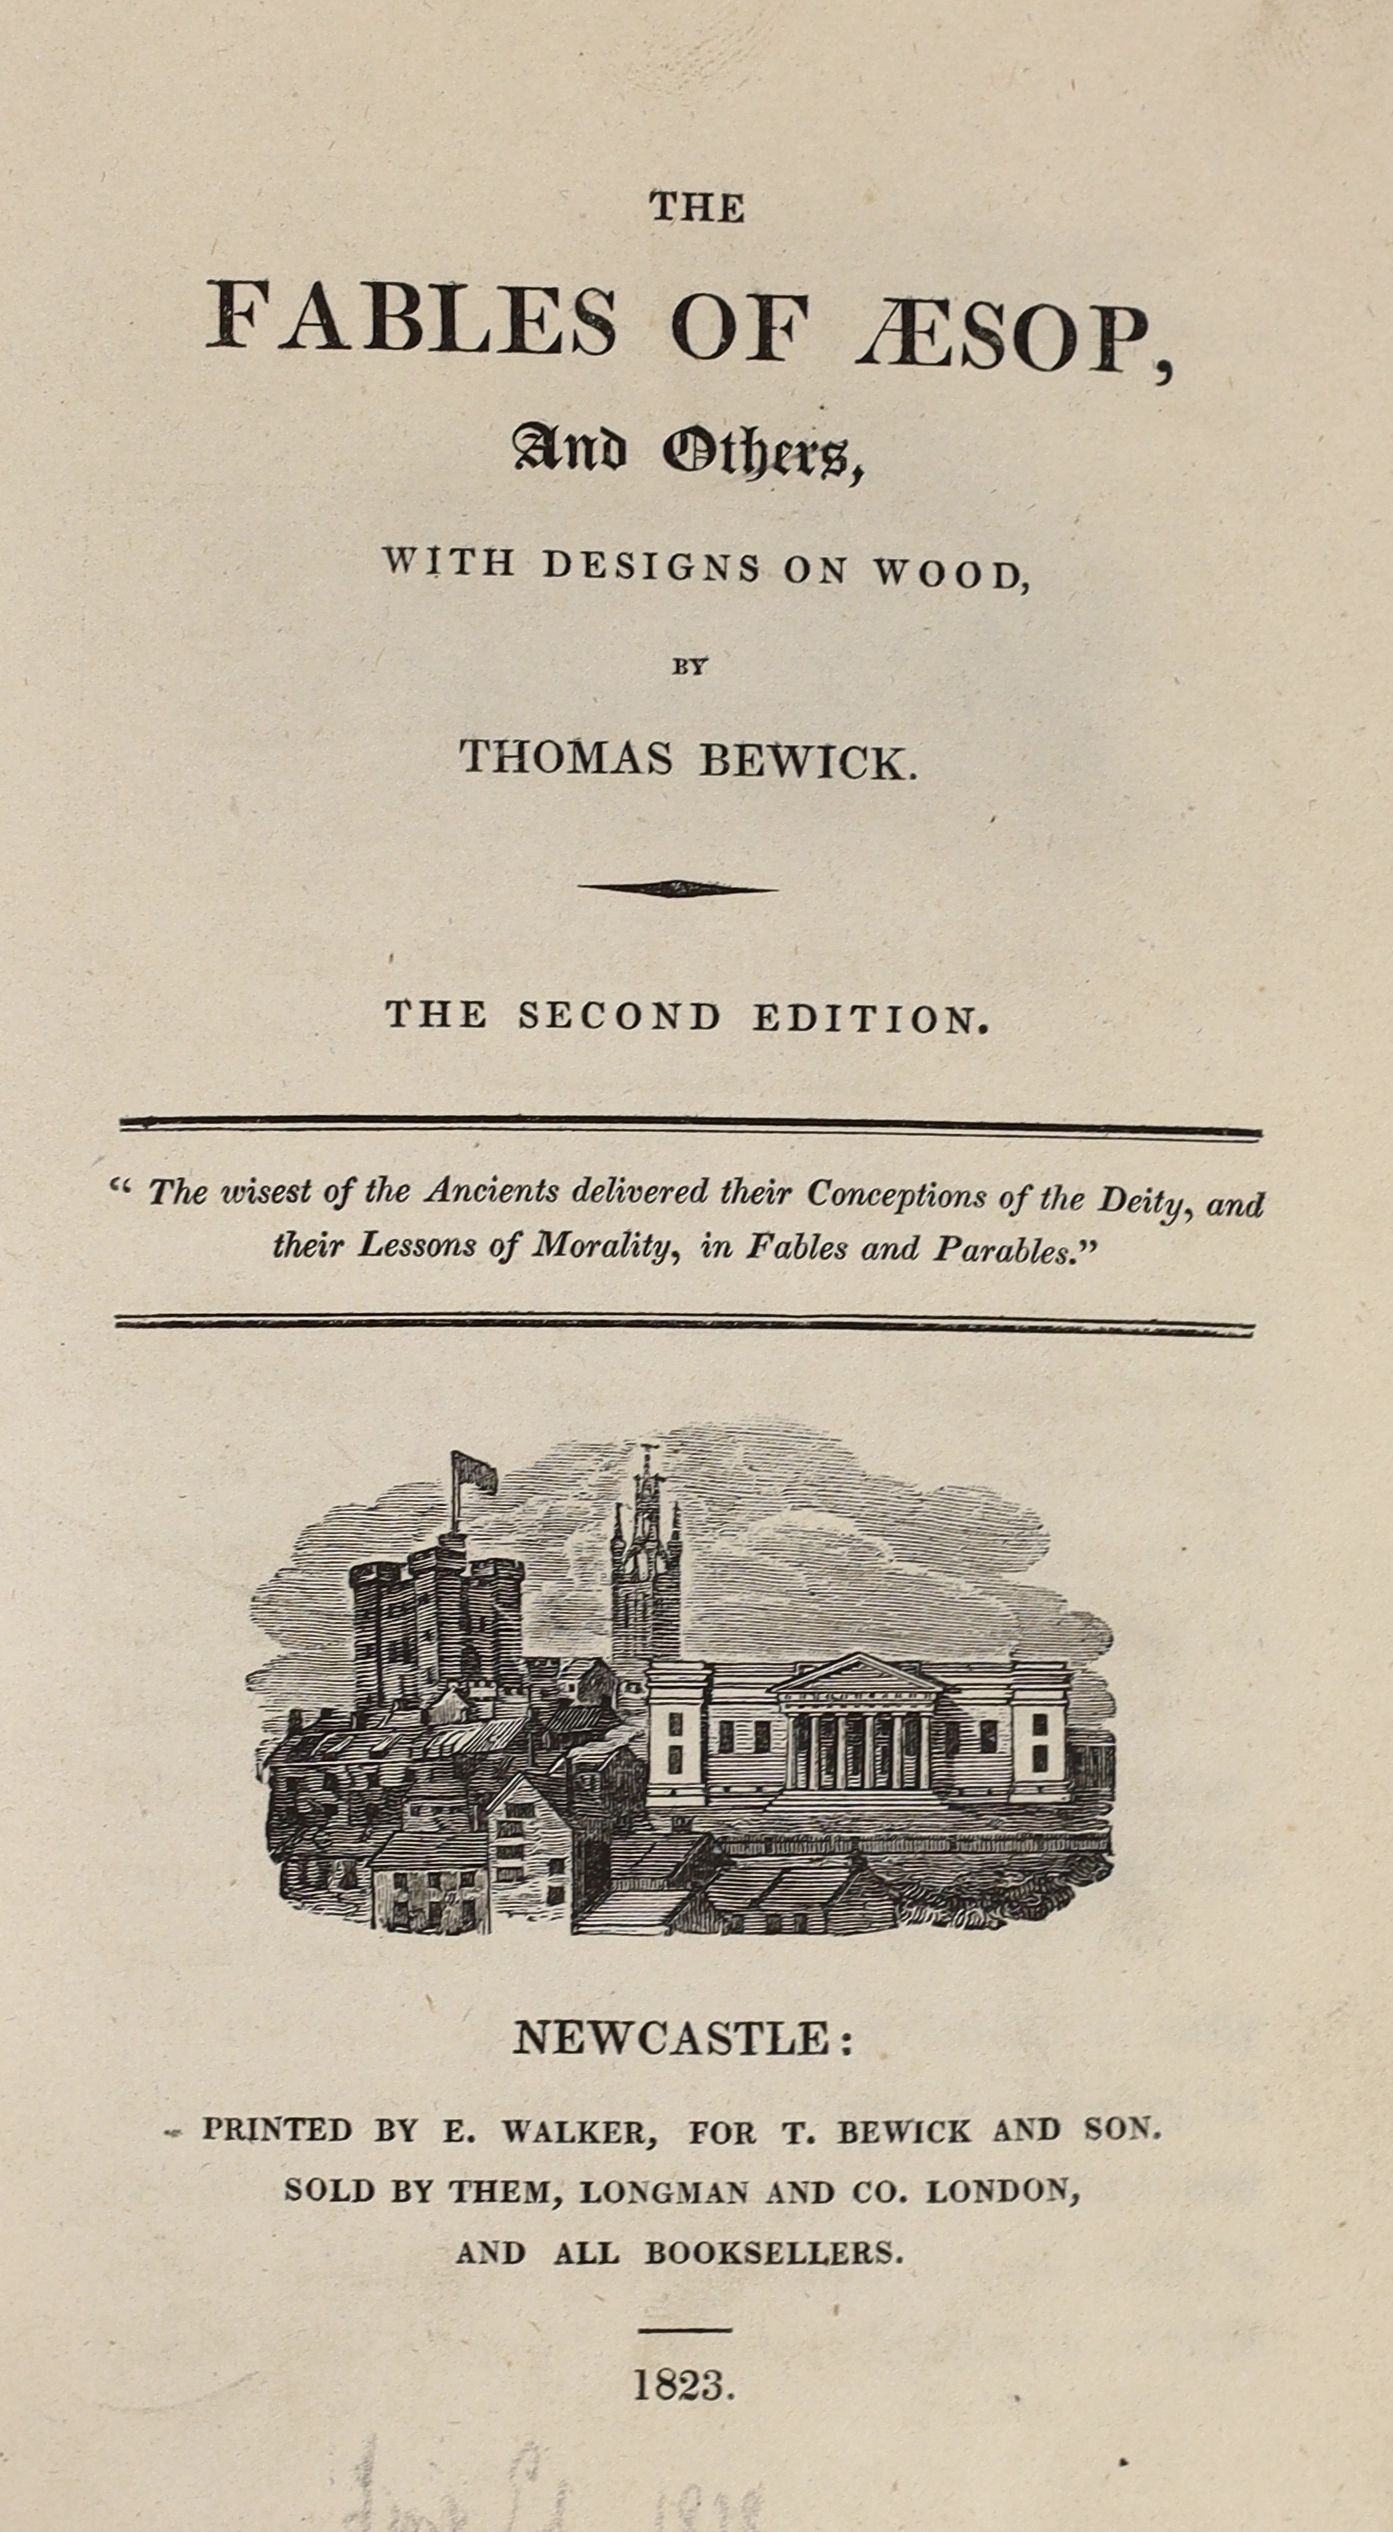 Bewick, Thomas - Fables of Aesop and Others, 2nd edition, with facsimile thumbprint, numbered 64, 8vo, blue calf gilt bordered, Newcastle, 1823